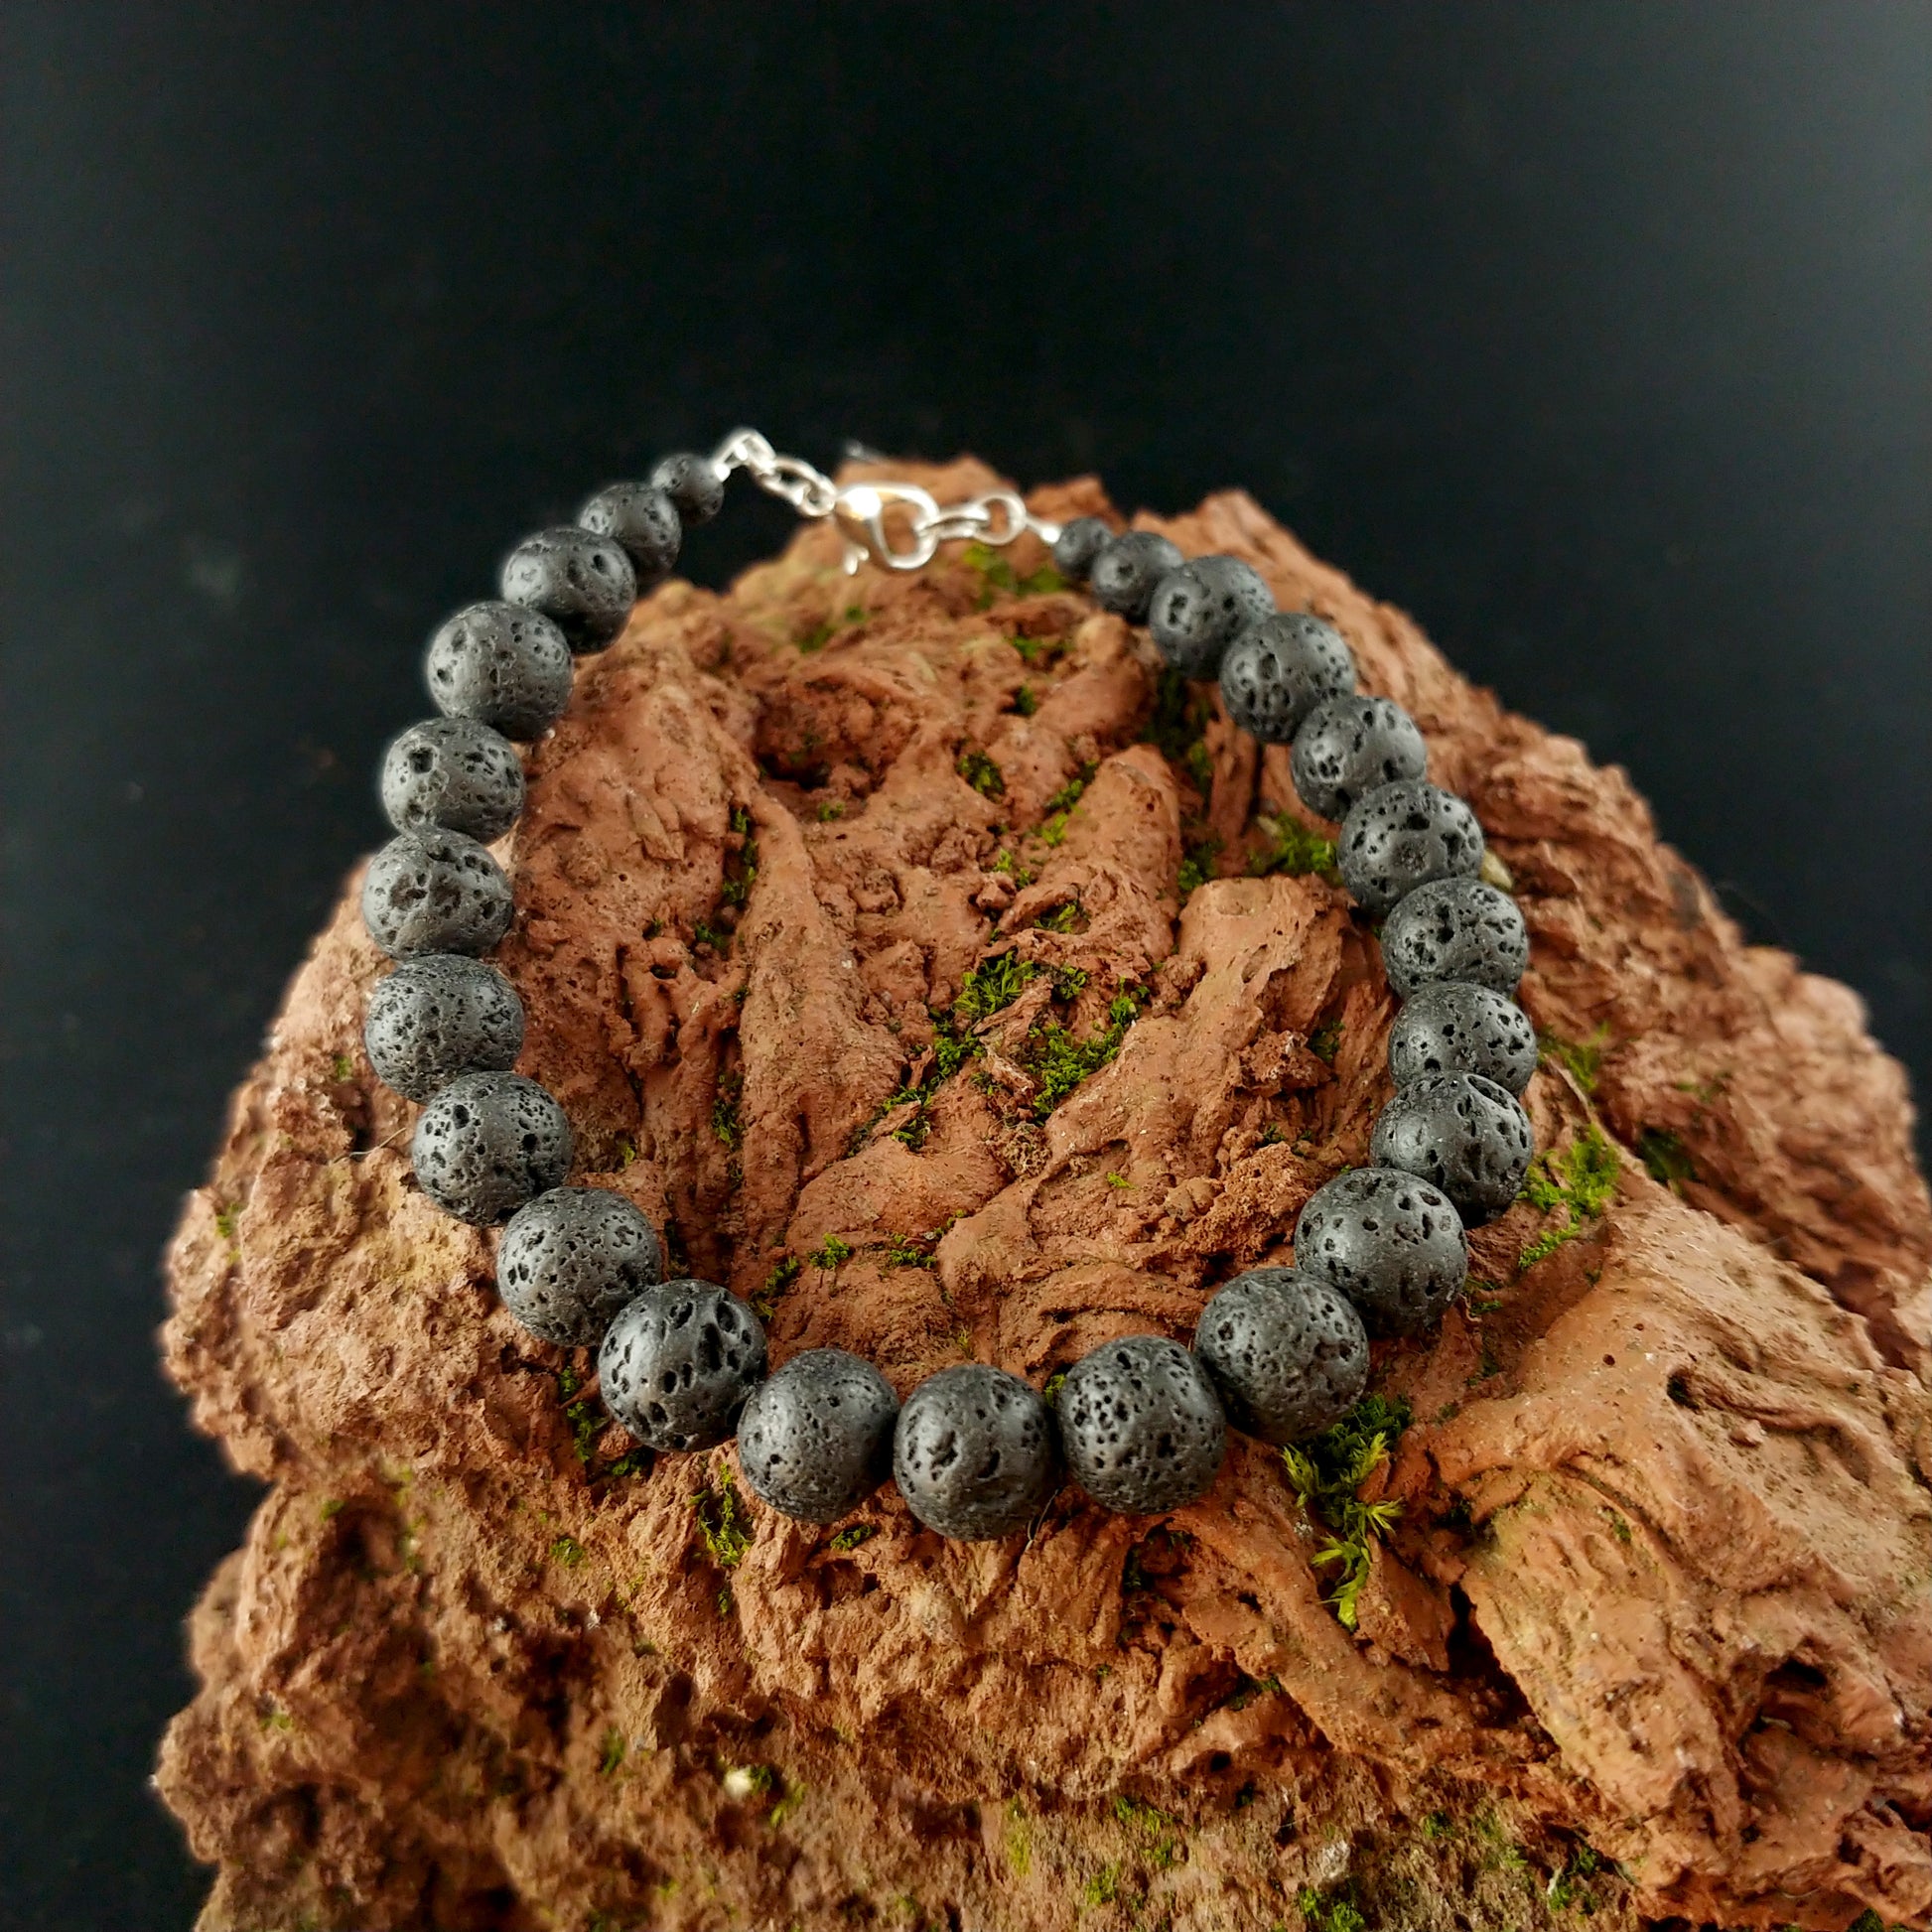 Plain lava rock bracelet with dark black round lava stones. The bracelet has a lobster claw clasp. The bracelet sits on a red magma lava rock.